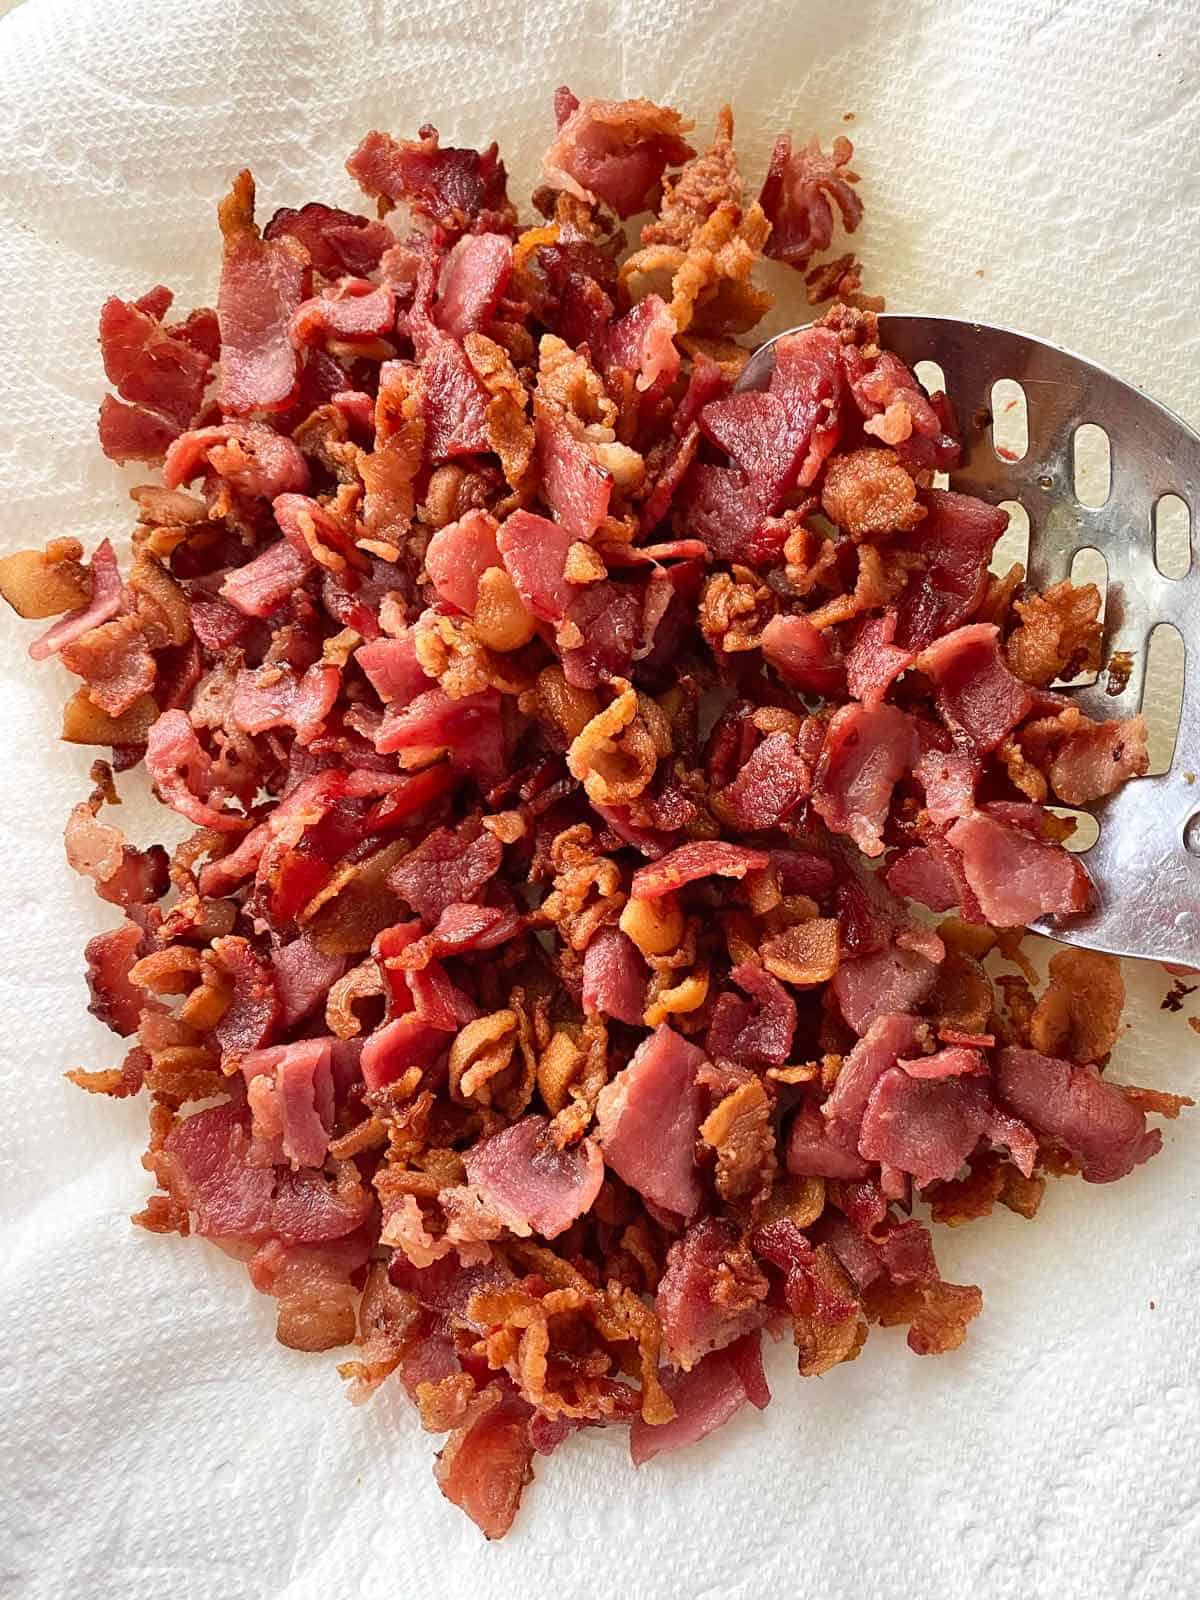 Chopped cooked bacon draining on paper towels.